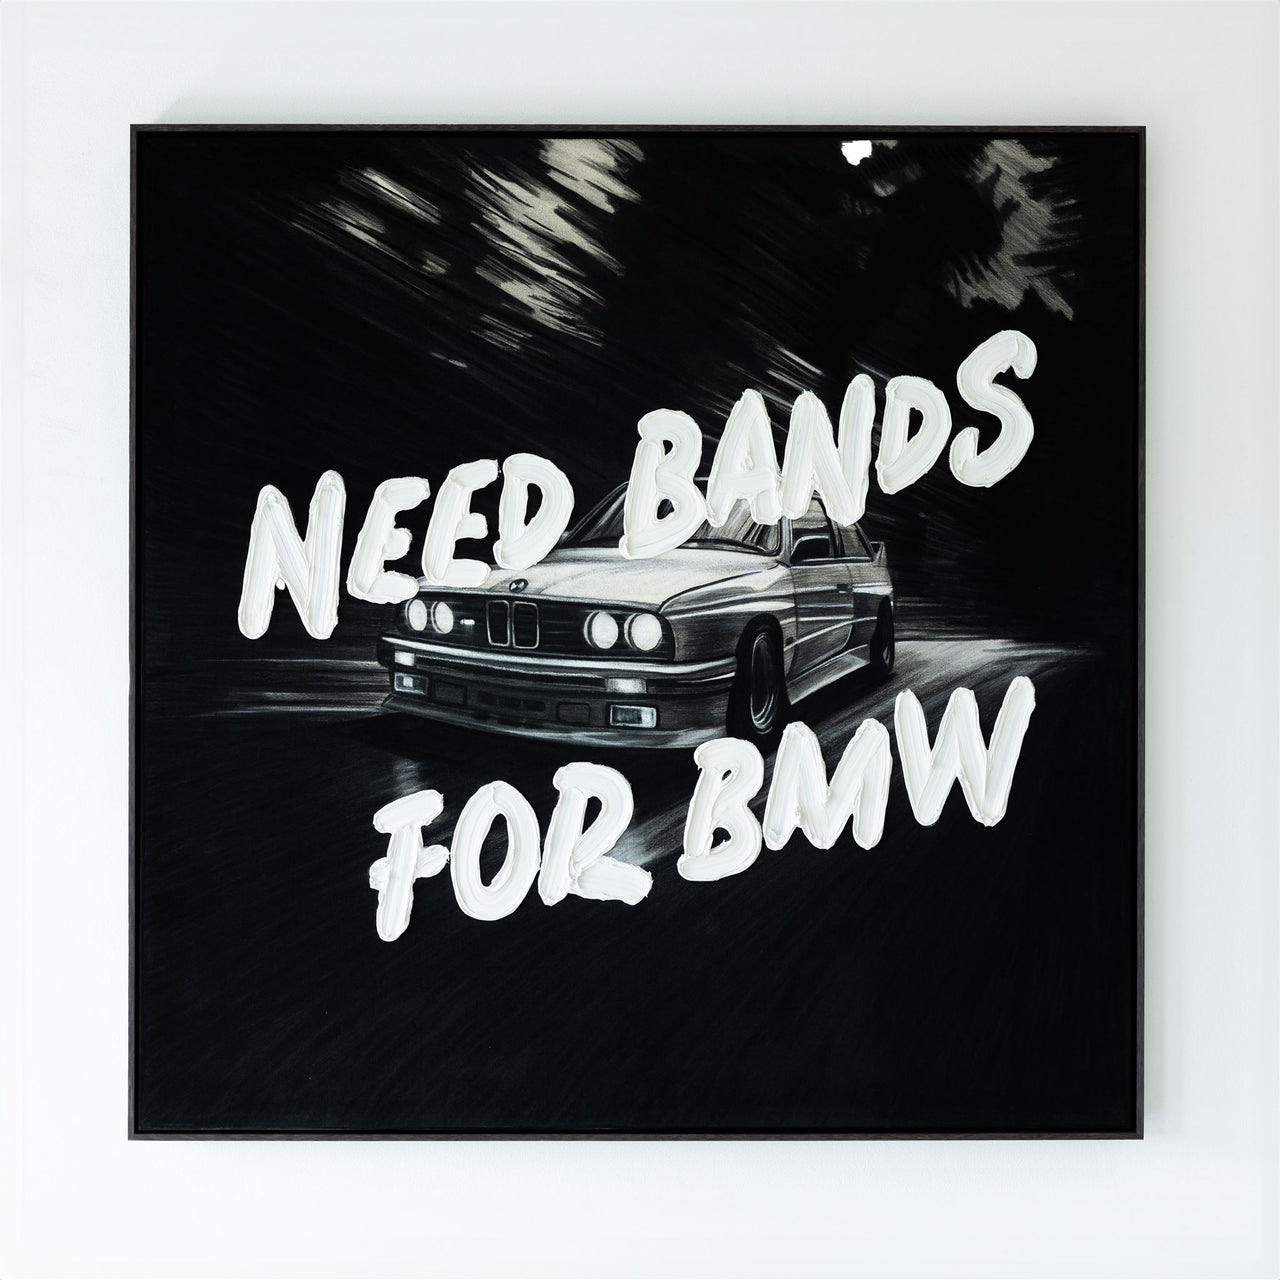 NEED BANDS FOR BMW